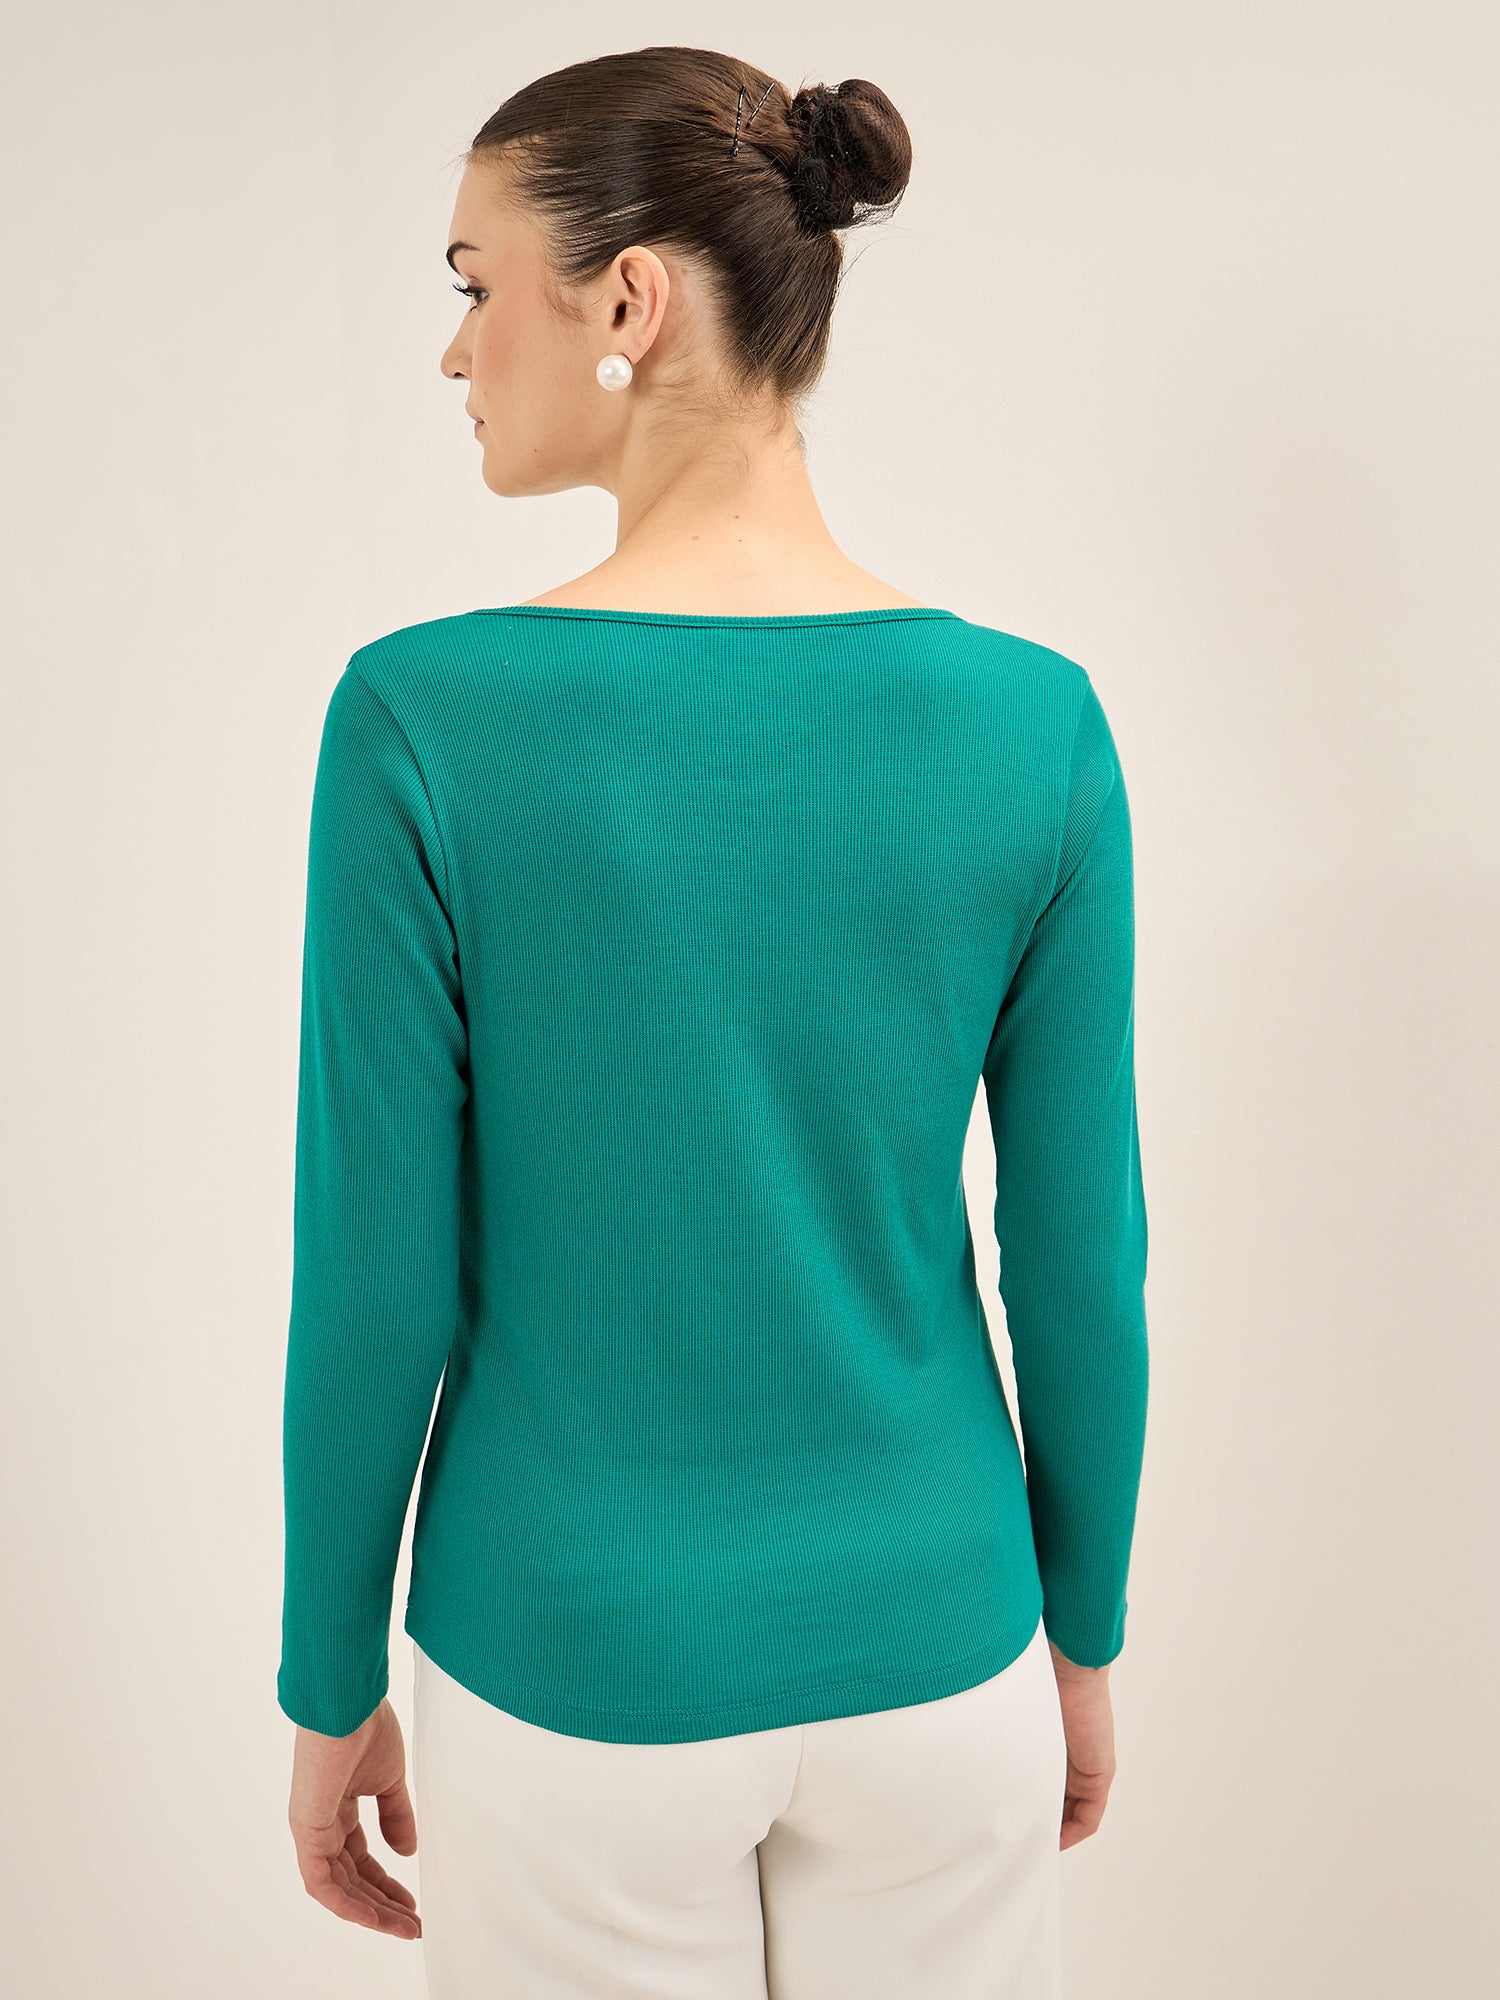 Everly-Green Keyhole Detail Rib Knit Top - Green